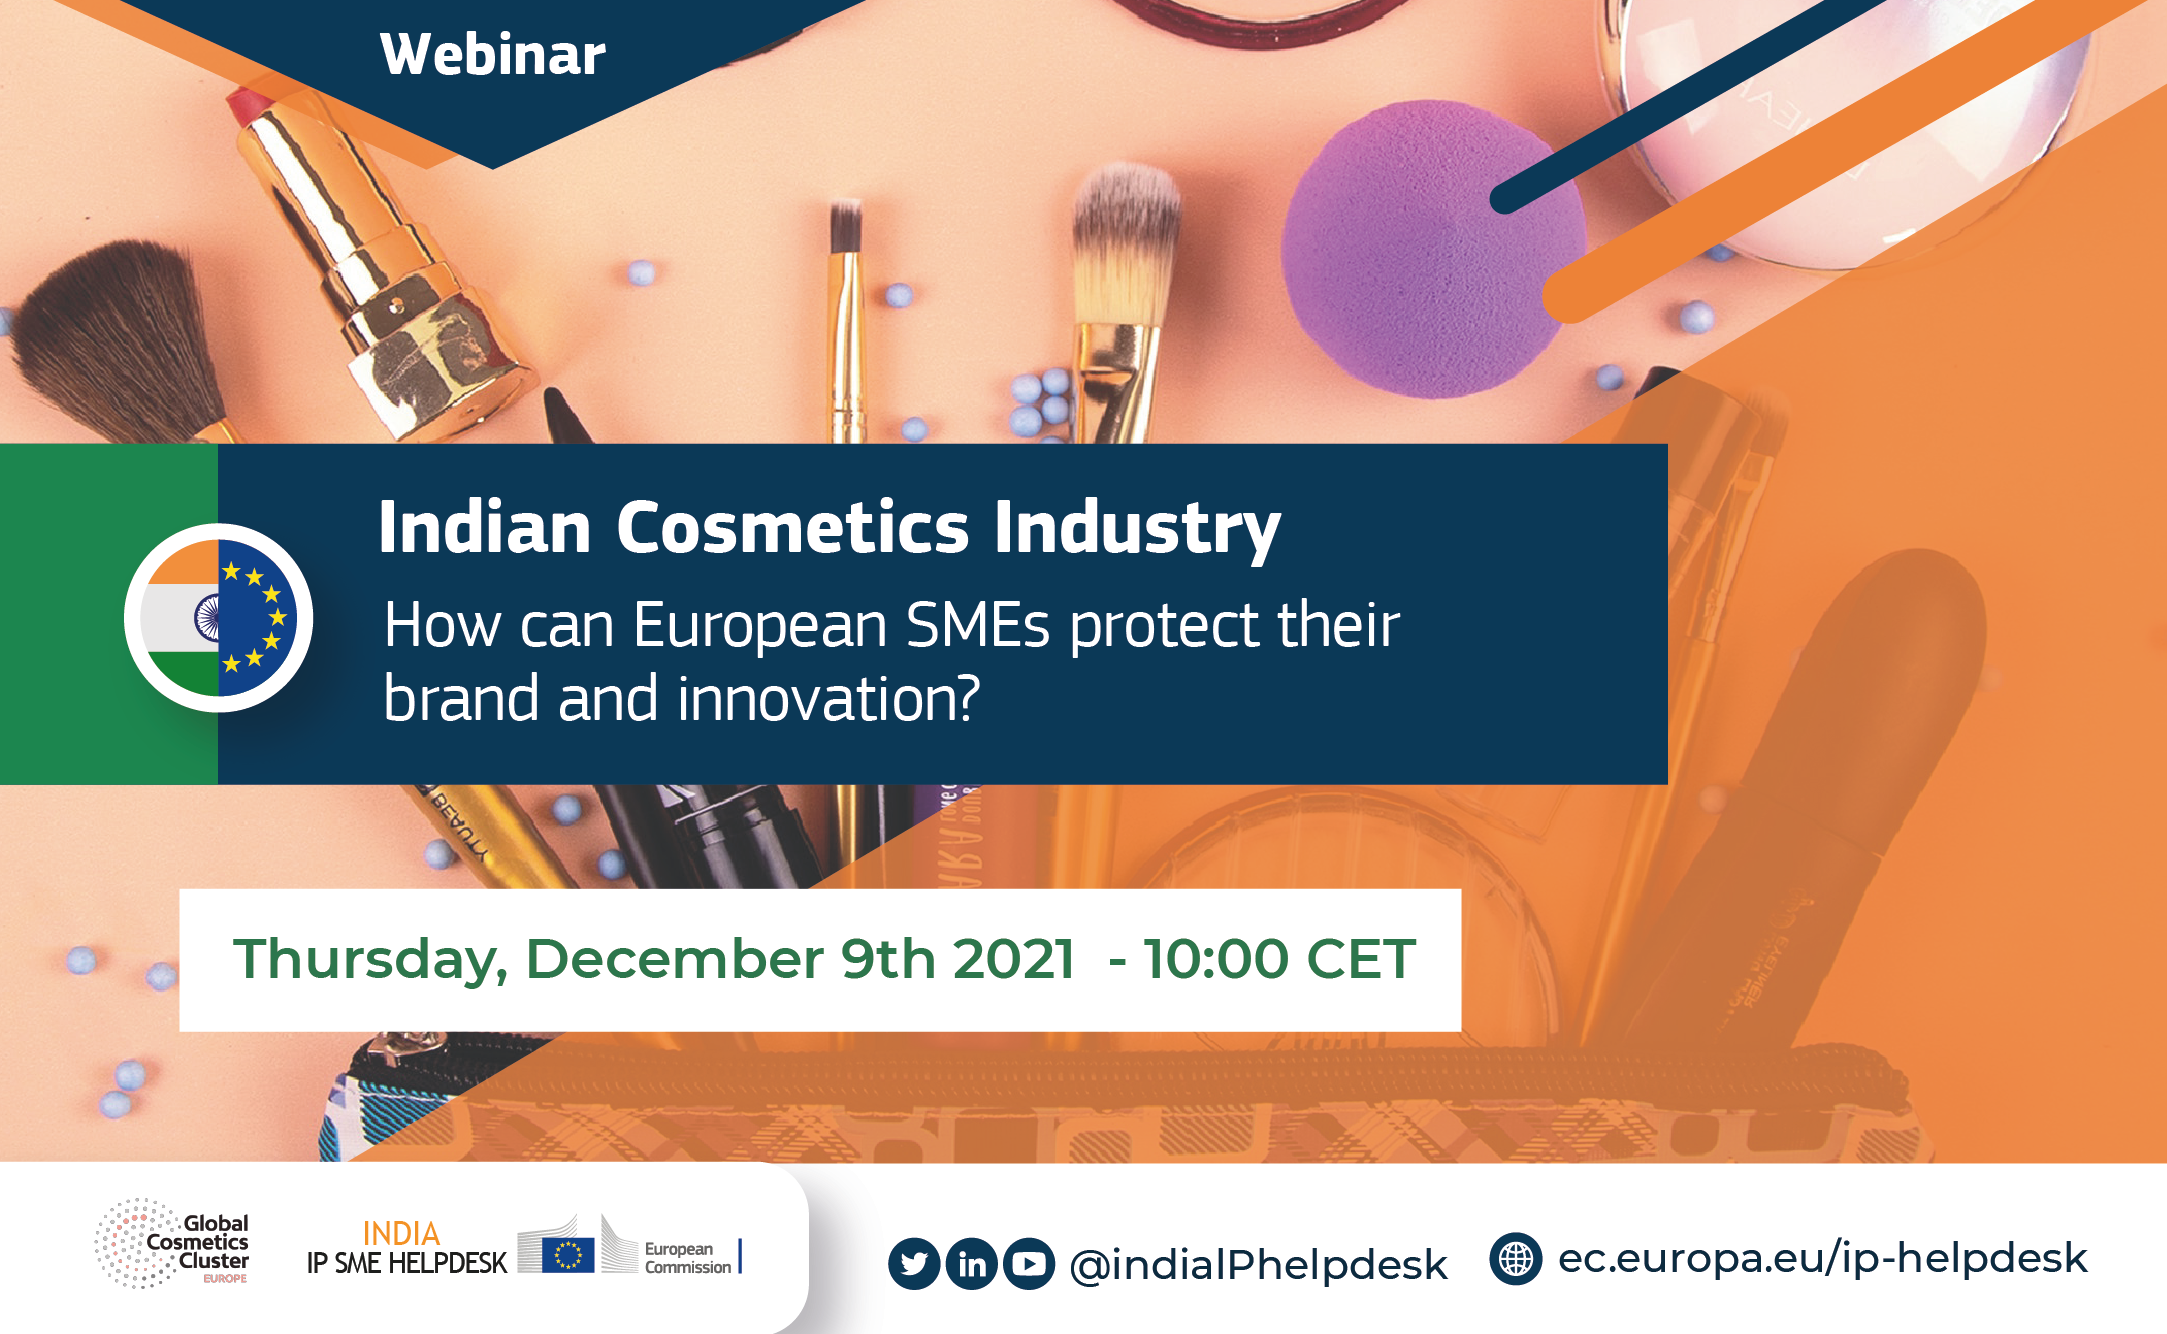 Indian Cosmetics Industry: how can European SMEs protect their brand and innovation?